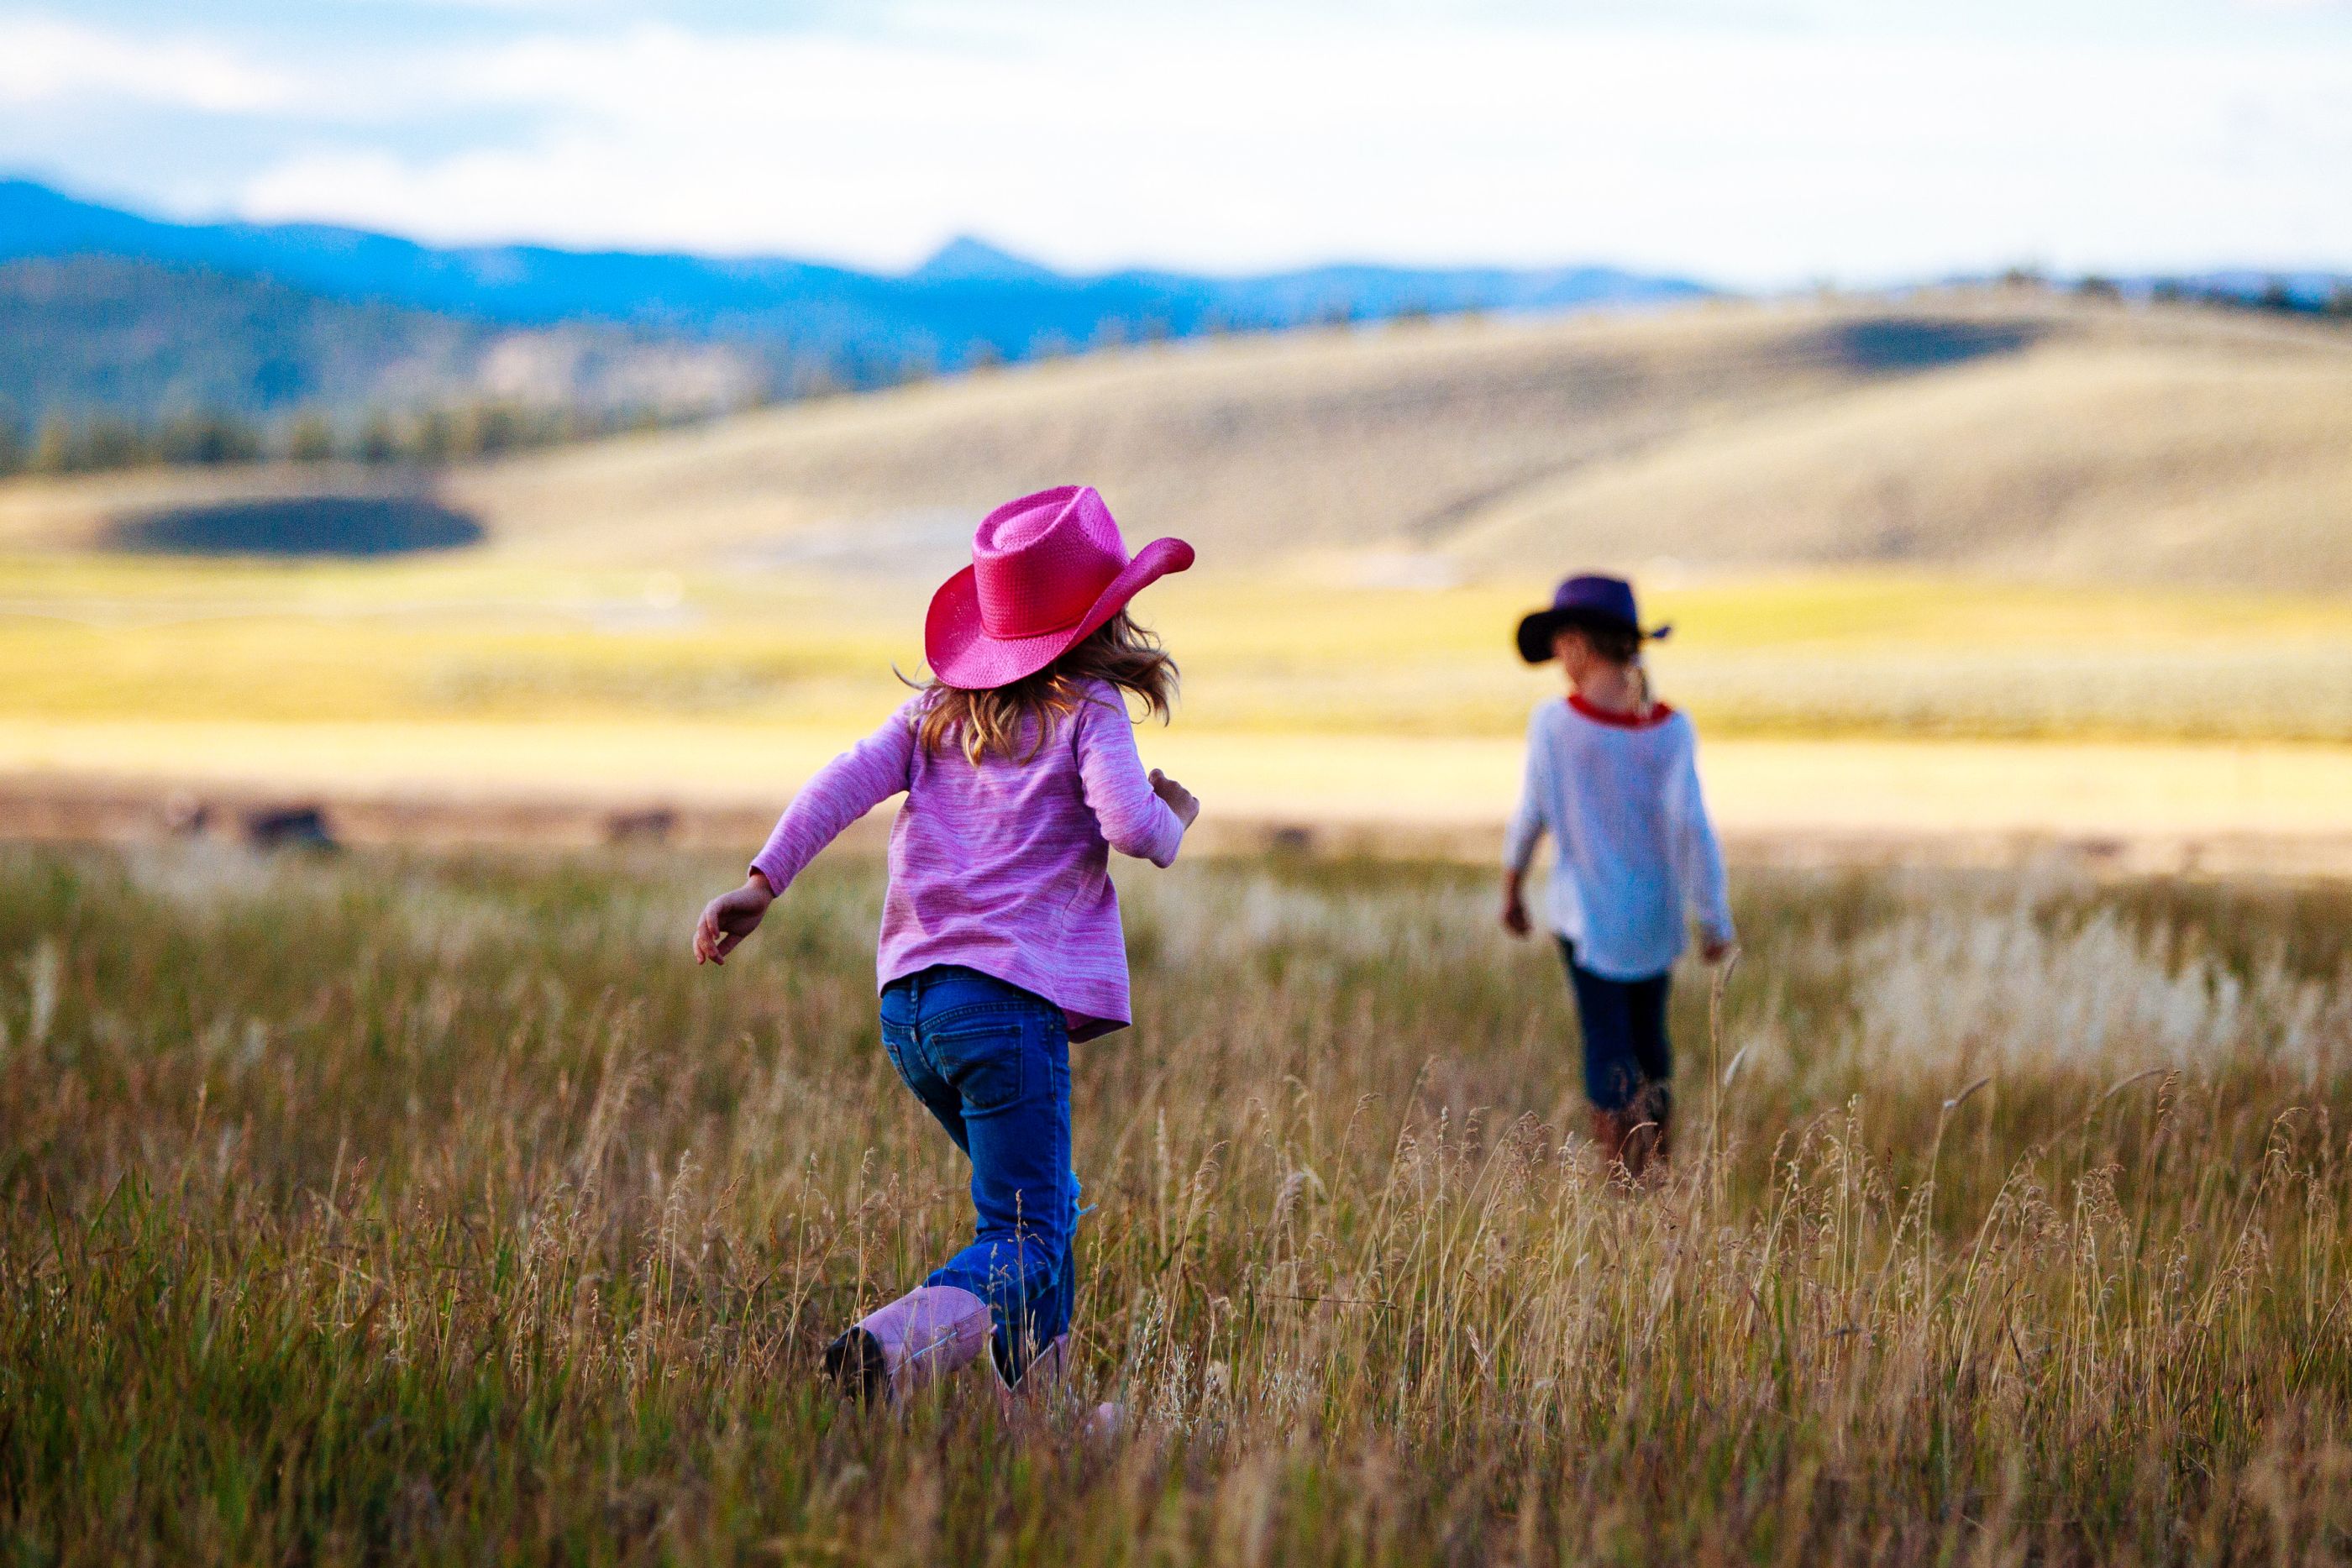 Children playing in the field of Paws Up Ranch, USA